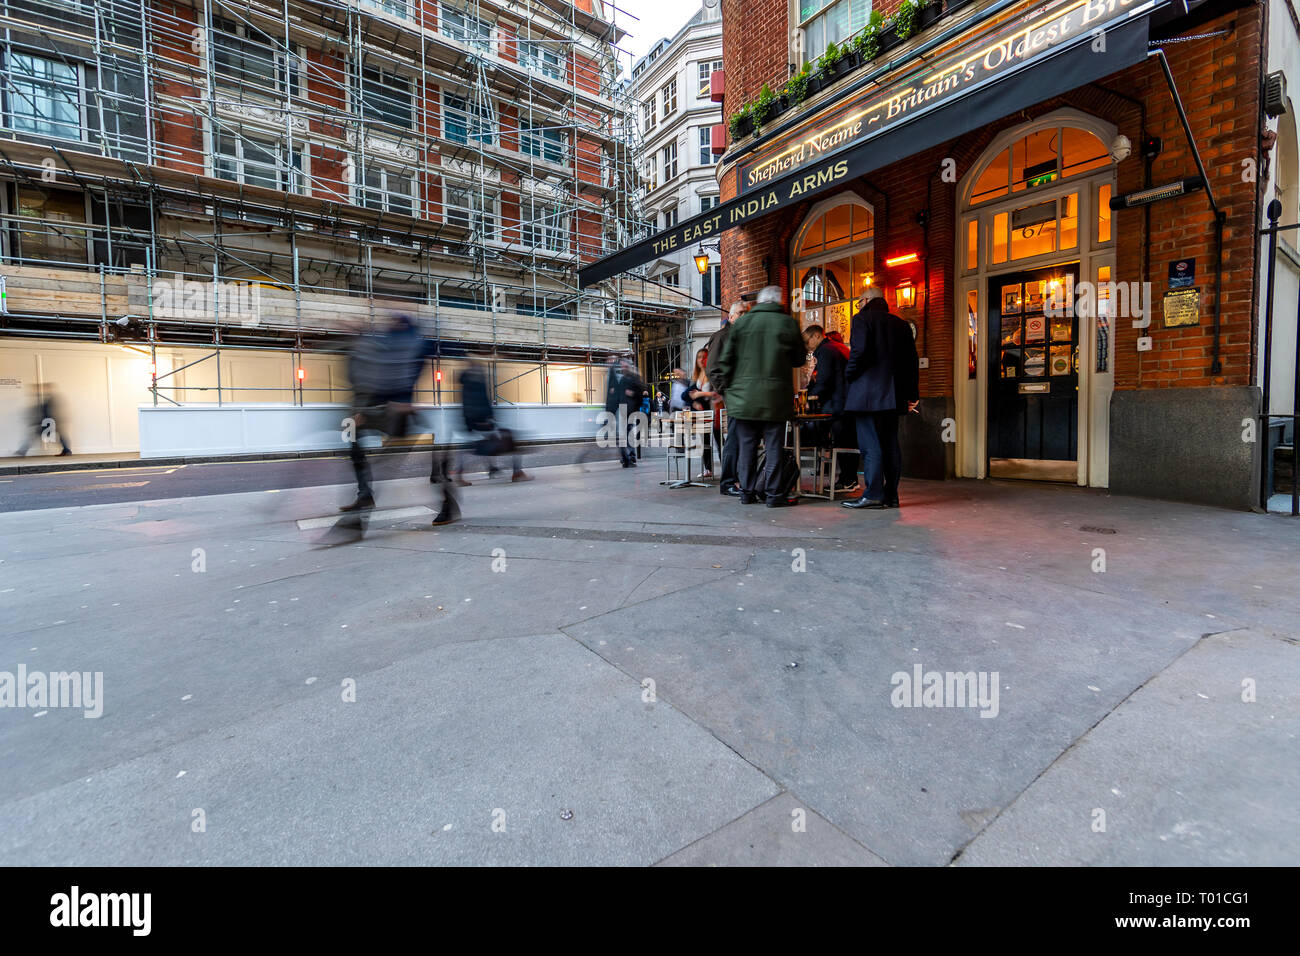 Drinkers and commuters mix on the street outside the East India Arms, 20 Fenchurch Street, London. Stock Photo